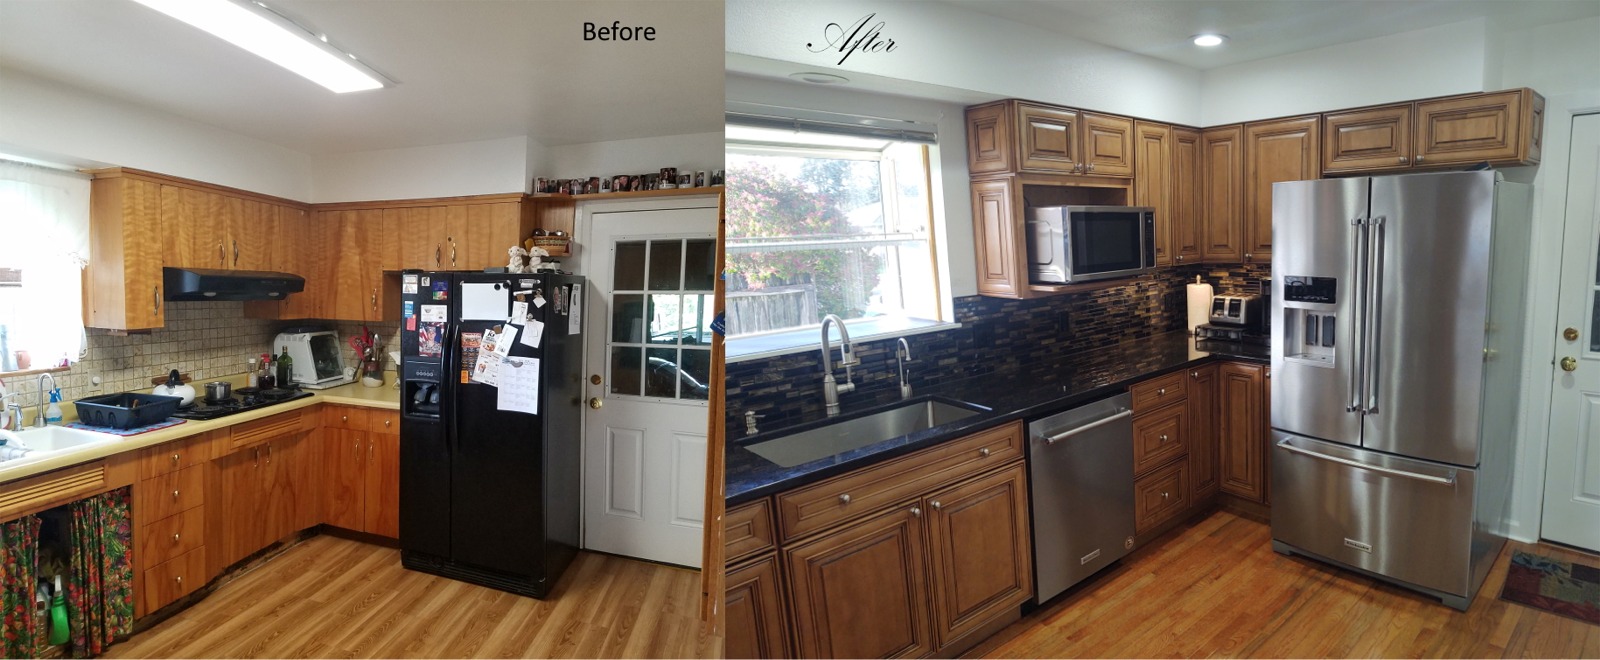 Kitchen Remodel before & after photos